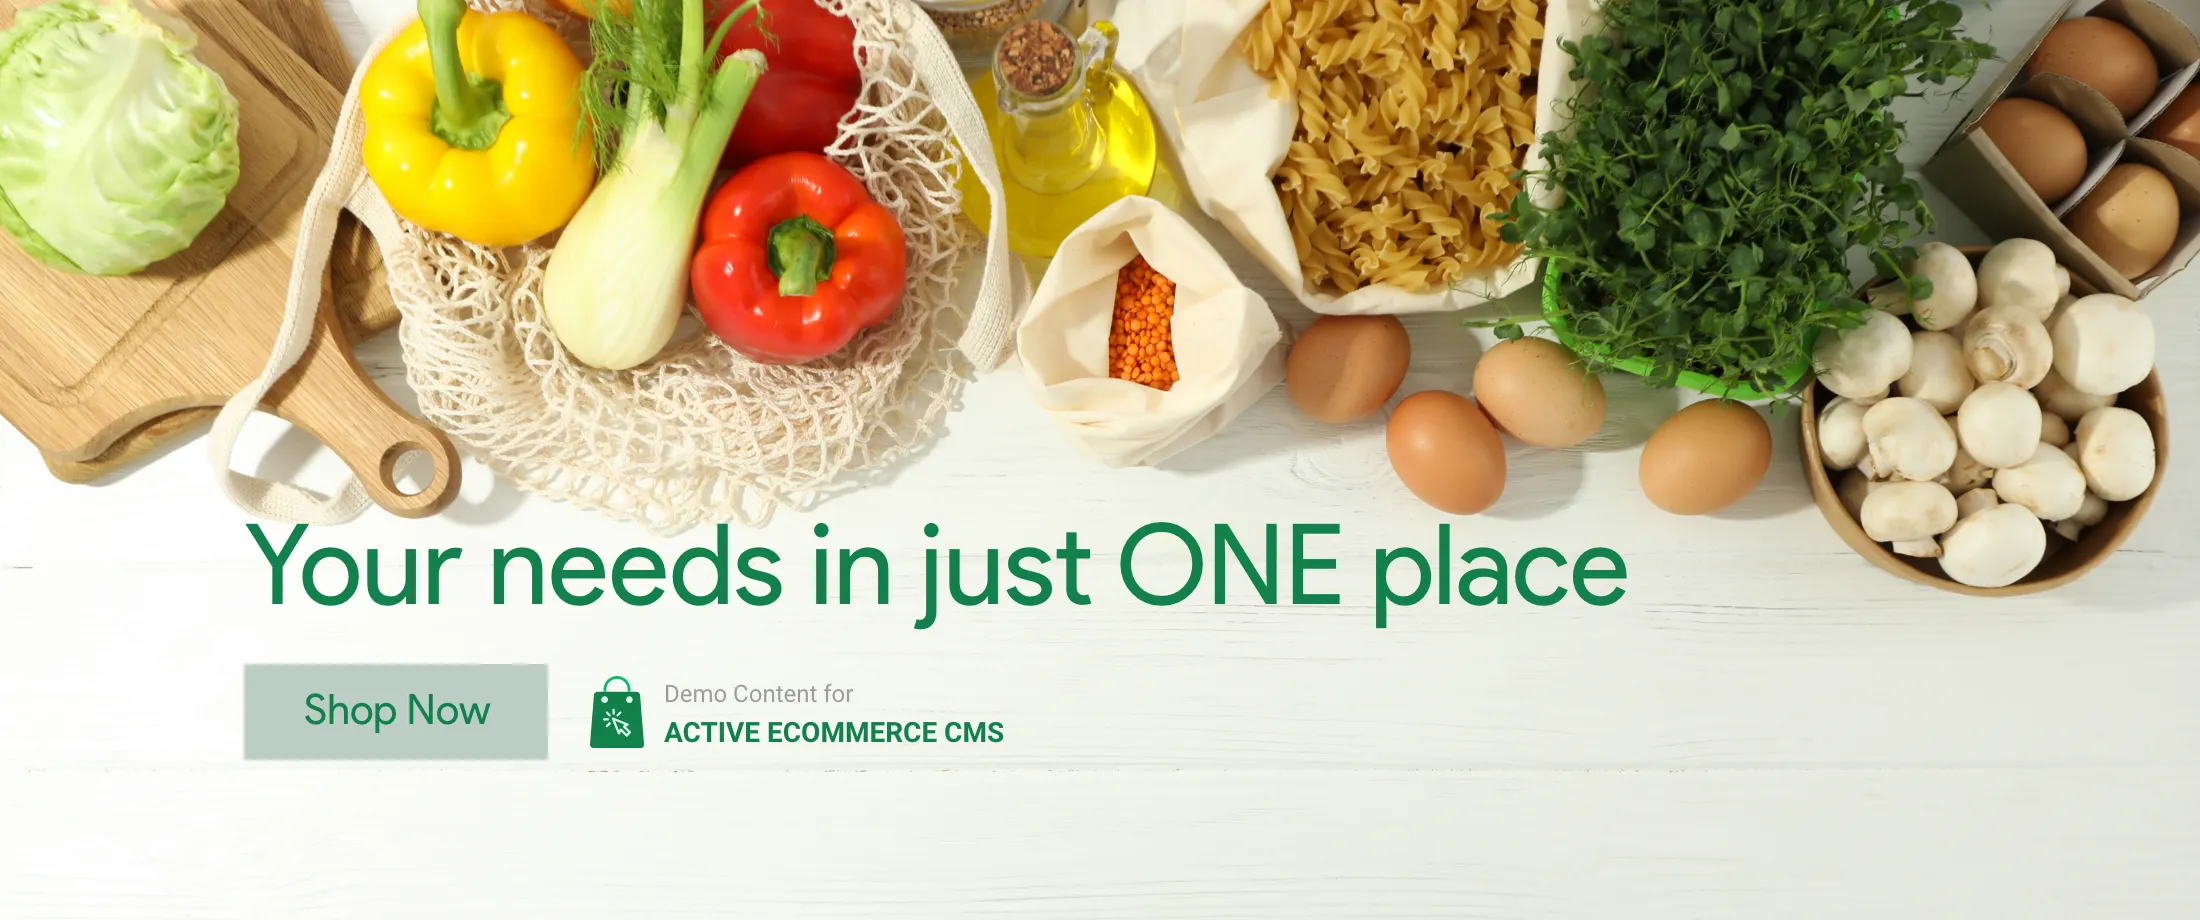 Active eCommerce Grocery promo